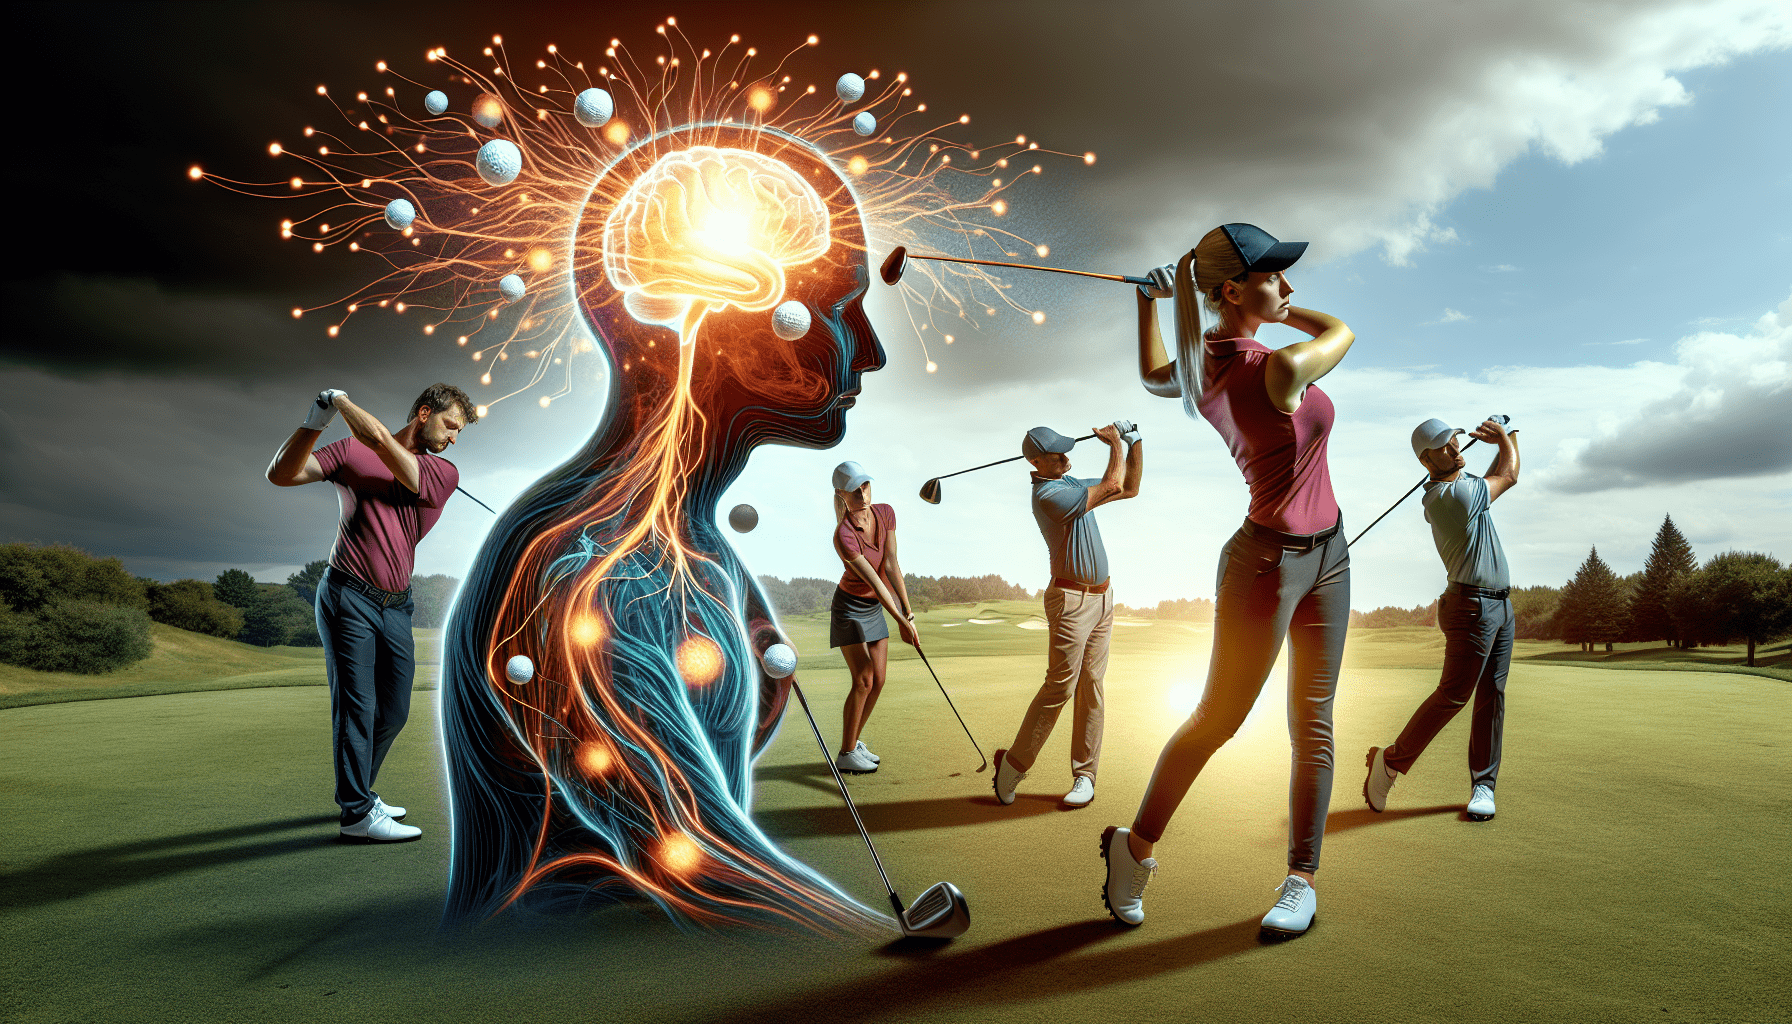 The Power of Mental Training in Golf